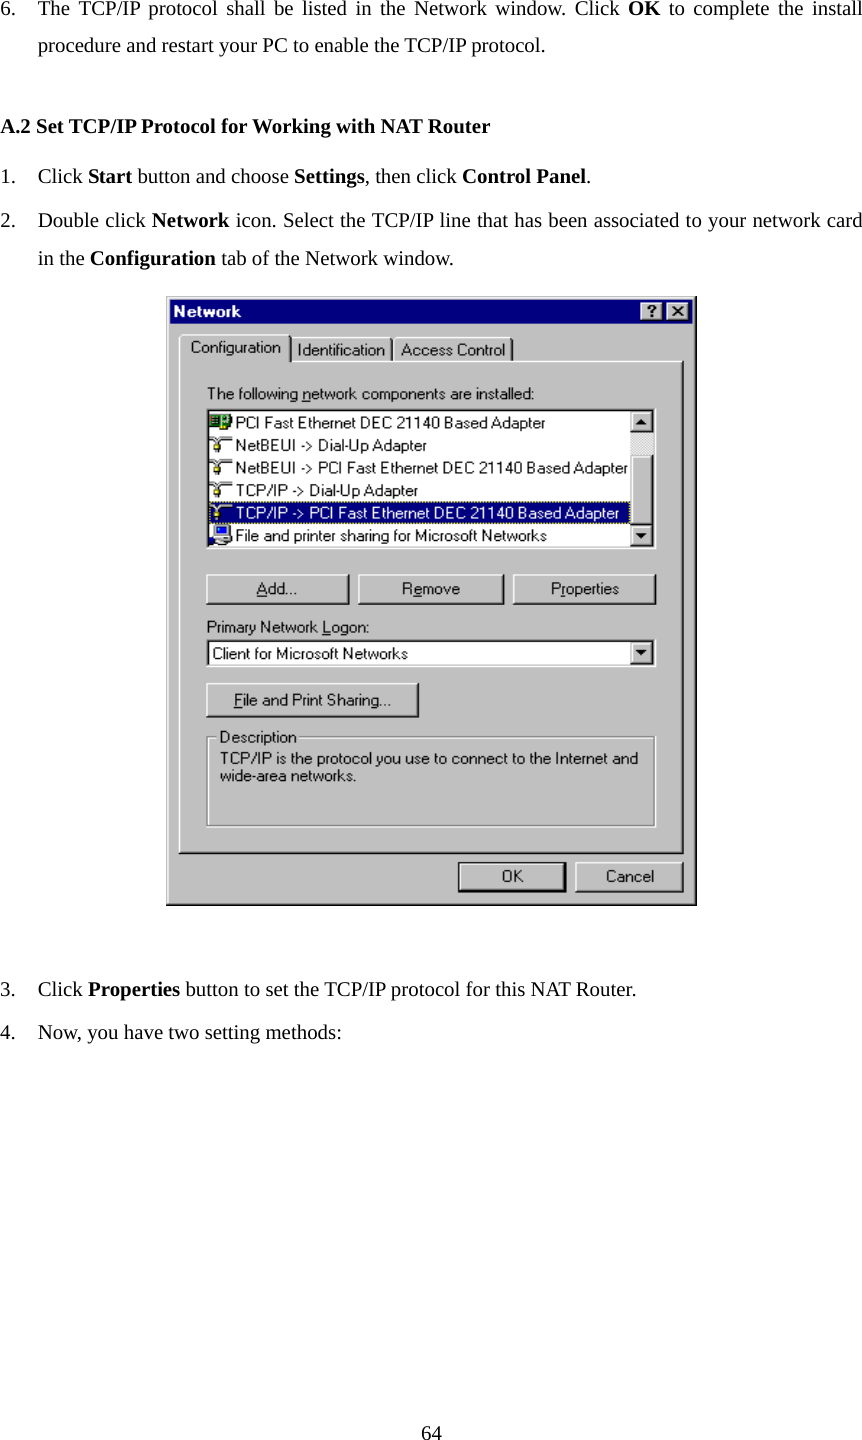  6. The TCP/IP protocol shall be listed in the Network window. Click OK to complete the install procedure and restart your PC to enable the TCP/IP protocol.  A.2 Set TCP/IP Protocol for Working with NAT Router 1. Click Start button and choose Settings, then click Control Panel. 2. Double click Network icon. Select the TCP/IP line that has been associated to your network card in the Configuration tab of the Network window.   3. Click Properties button to set the TCP/IP protocol for this NAT Router. 4. Now, you have two setting methods:  64